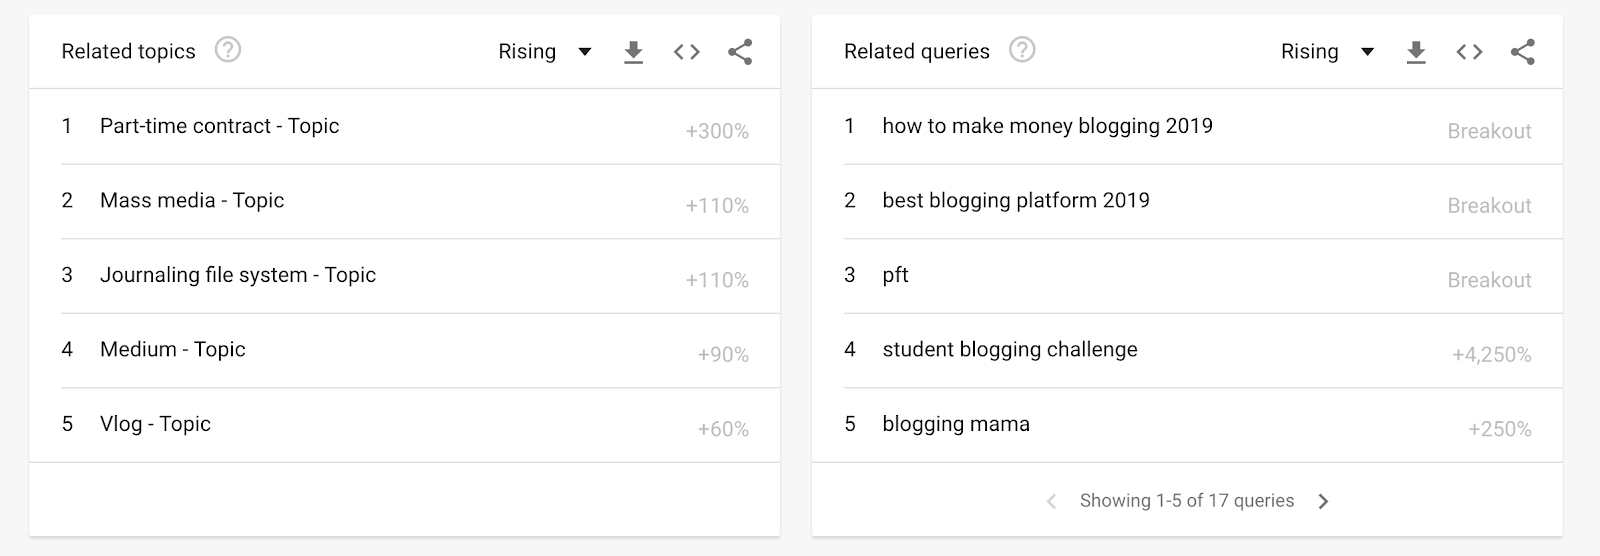 Related Keyword Topics and Search Queries for Blogging in Google Trends